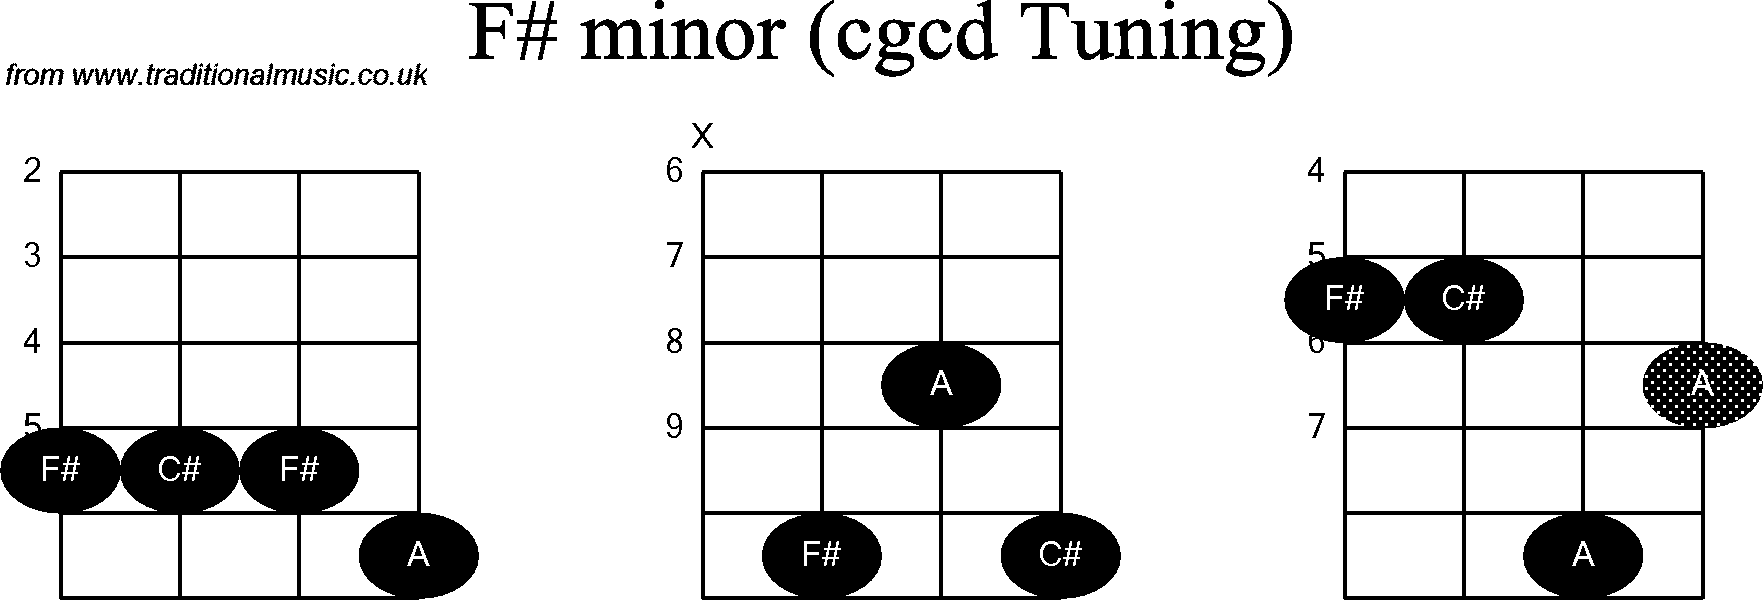 Chord diagrams for Banjo(Double C) F# Minor